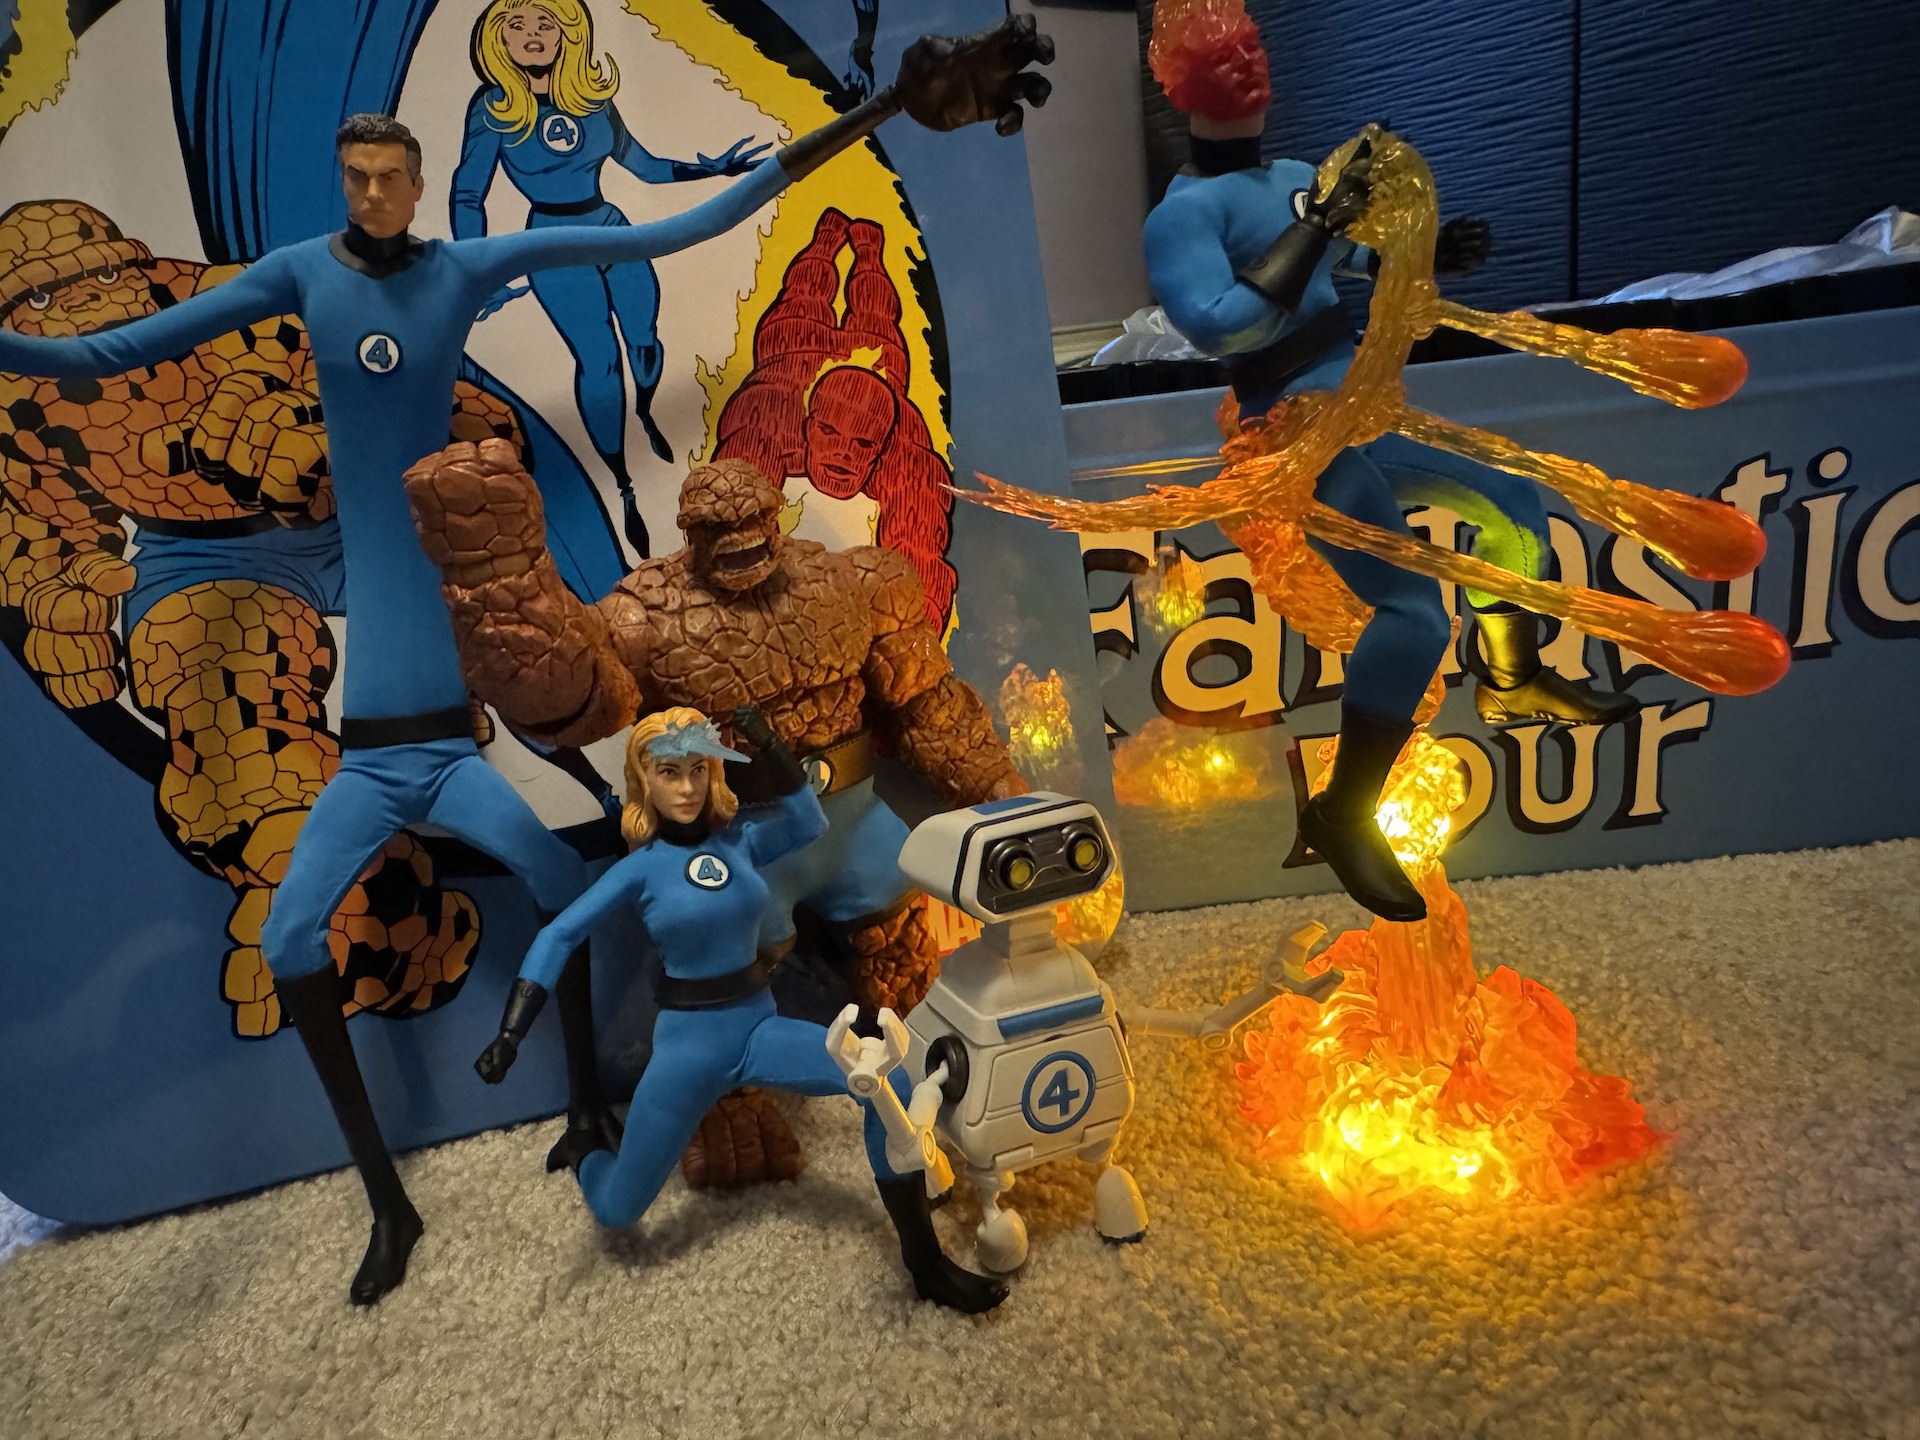 'Fantastic Four - Deluxe Steel Boxed Set' is packed with great accessories